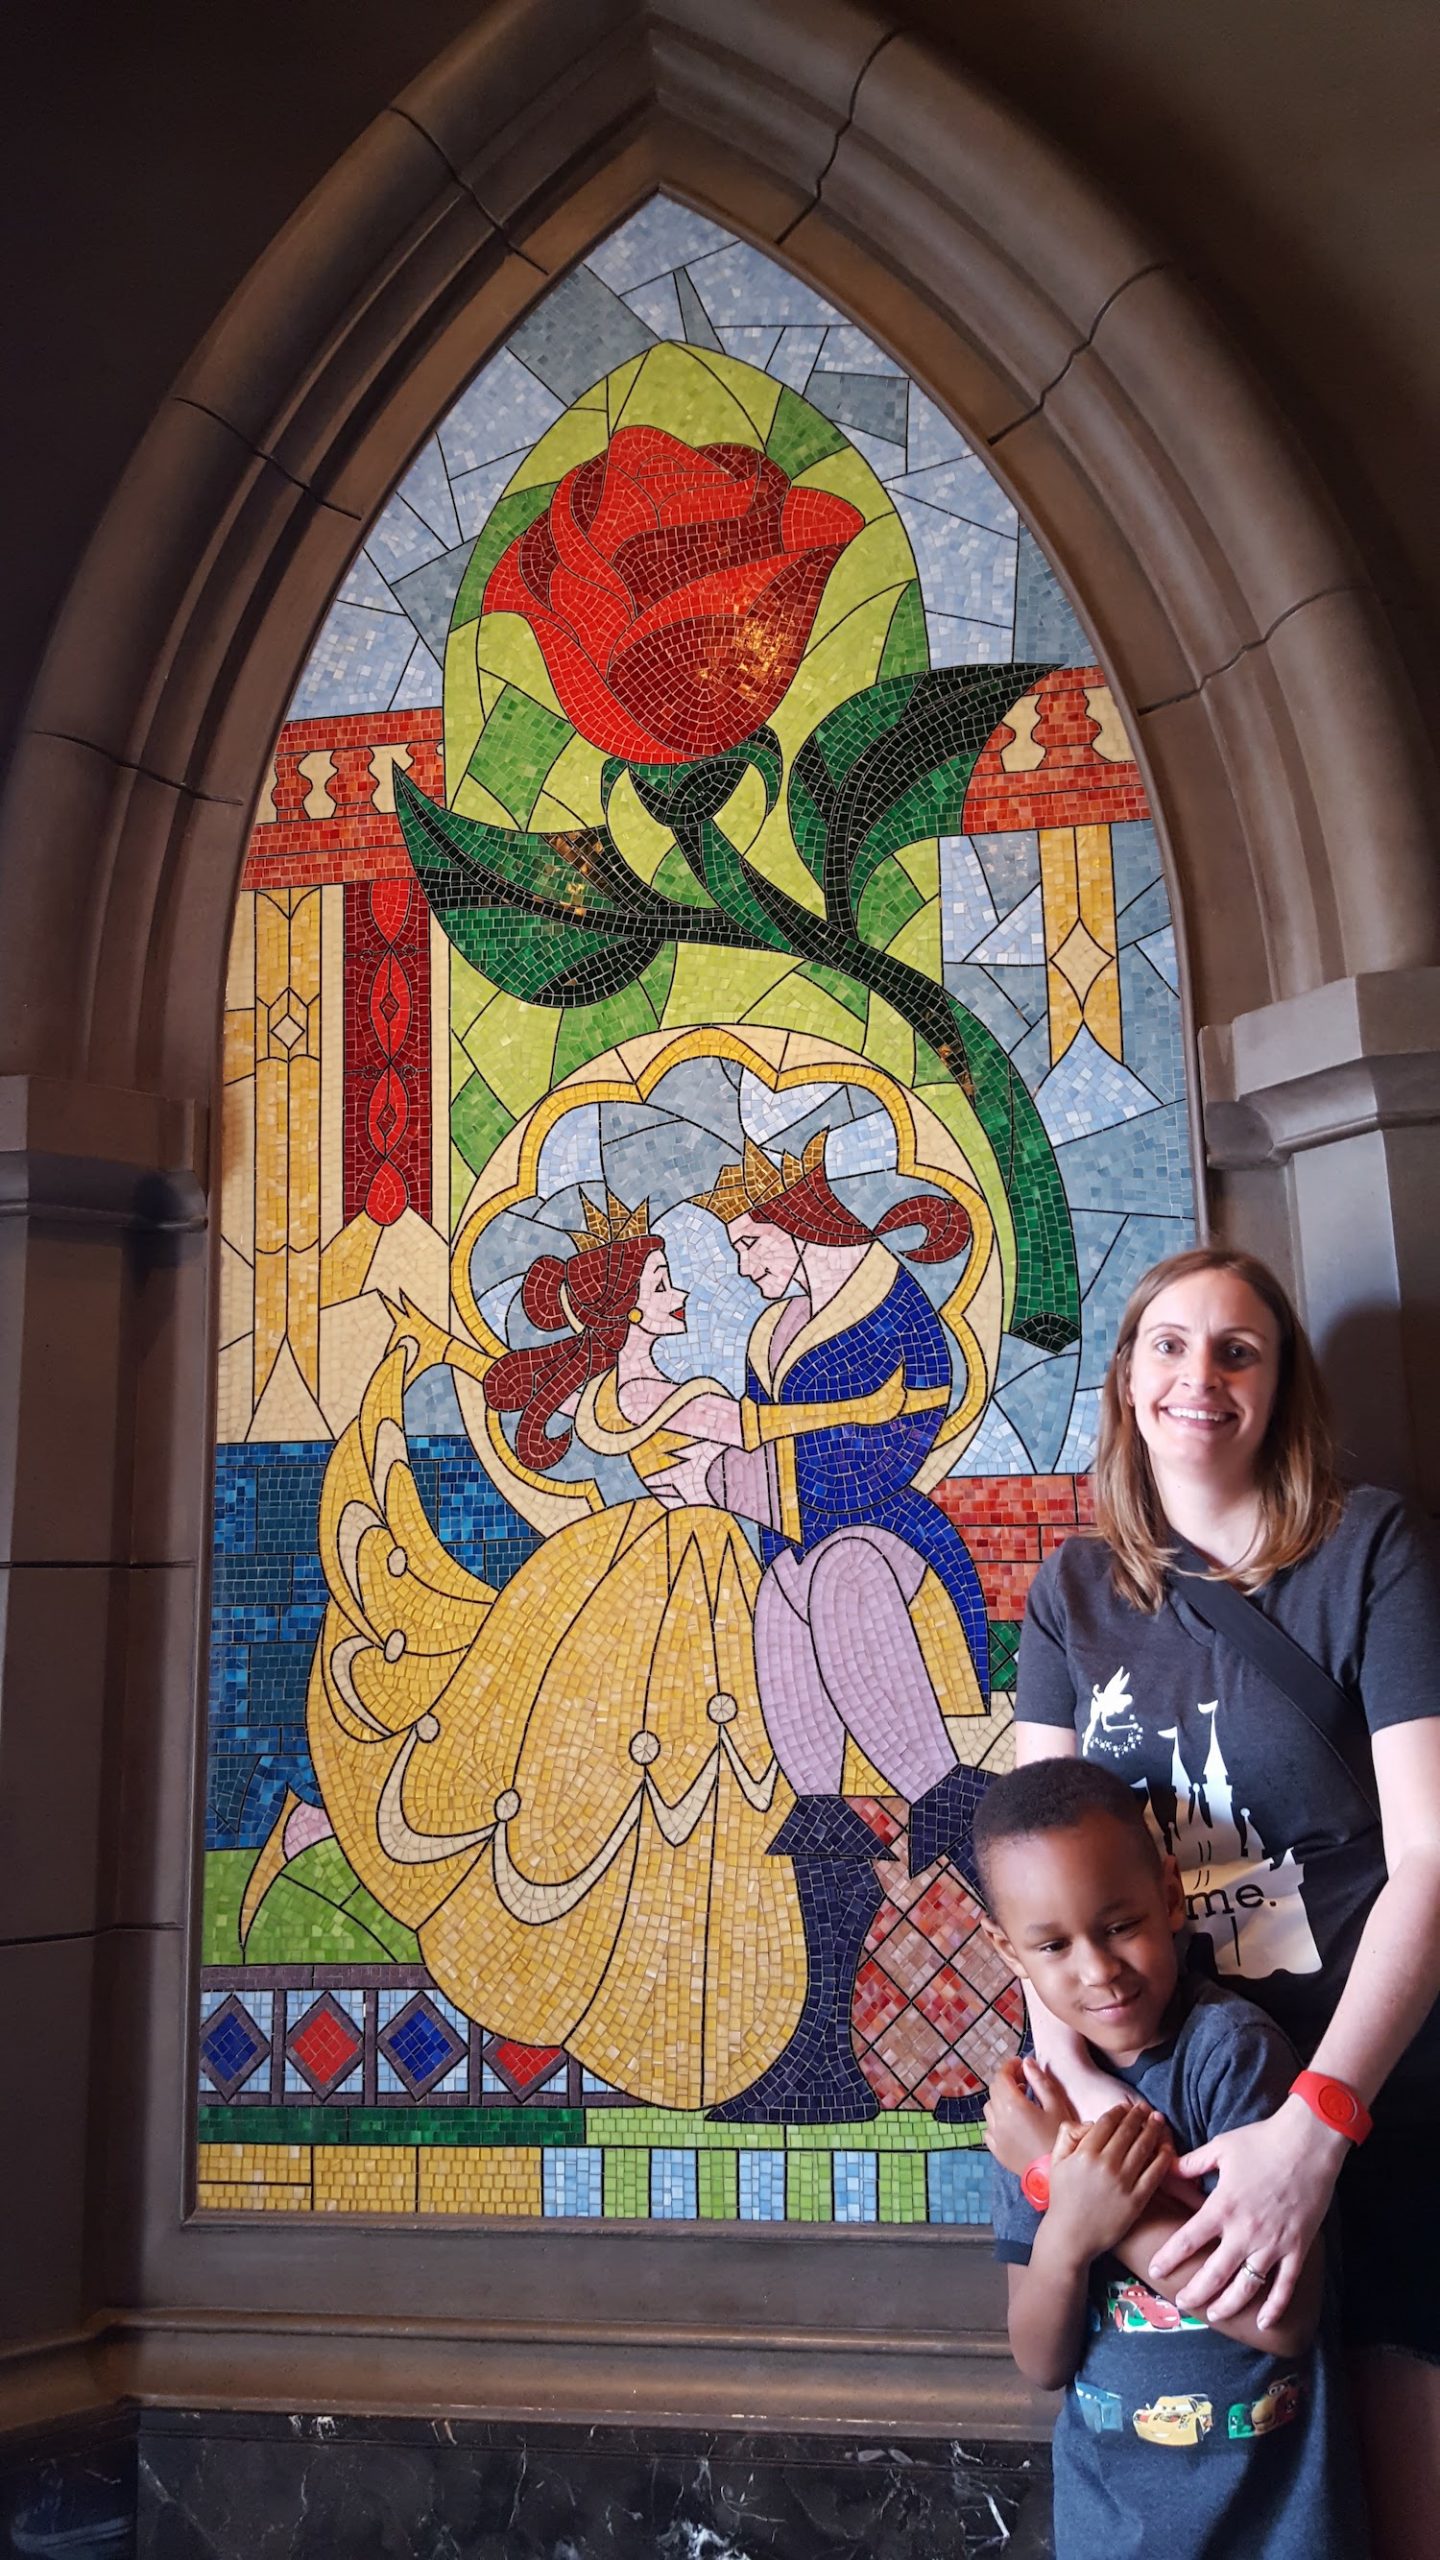 Beauty and the Beast stained glass mosaic window